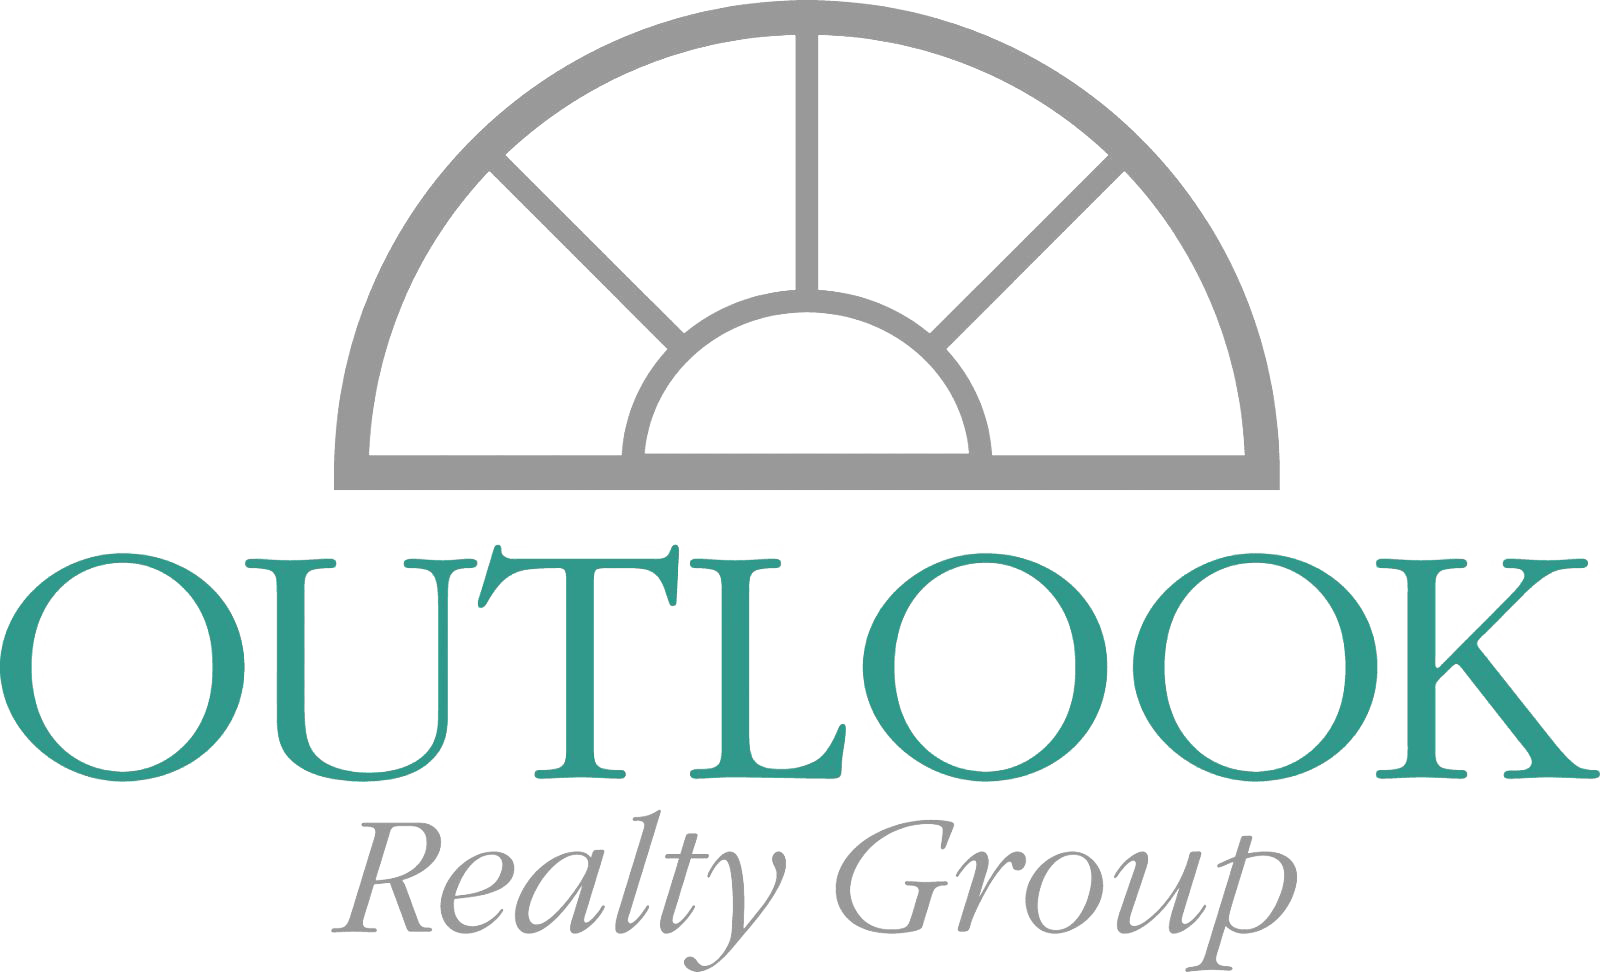 Outlook Realty Group logo